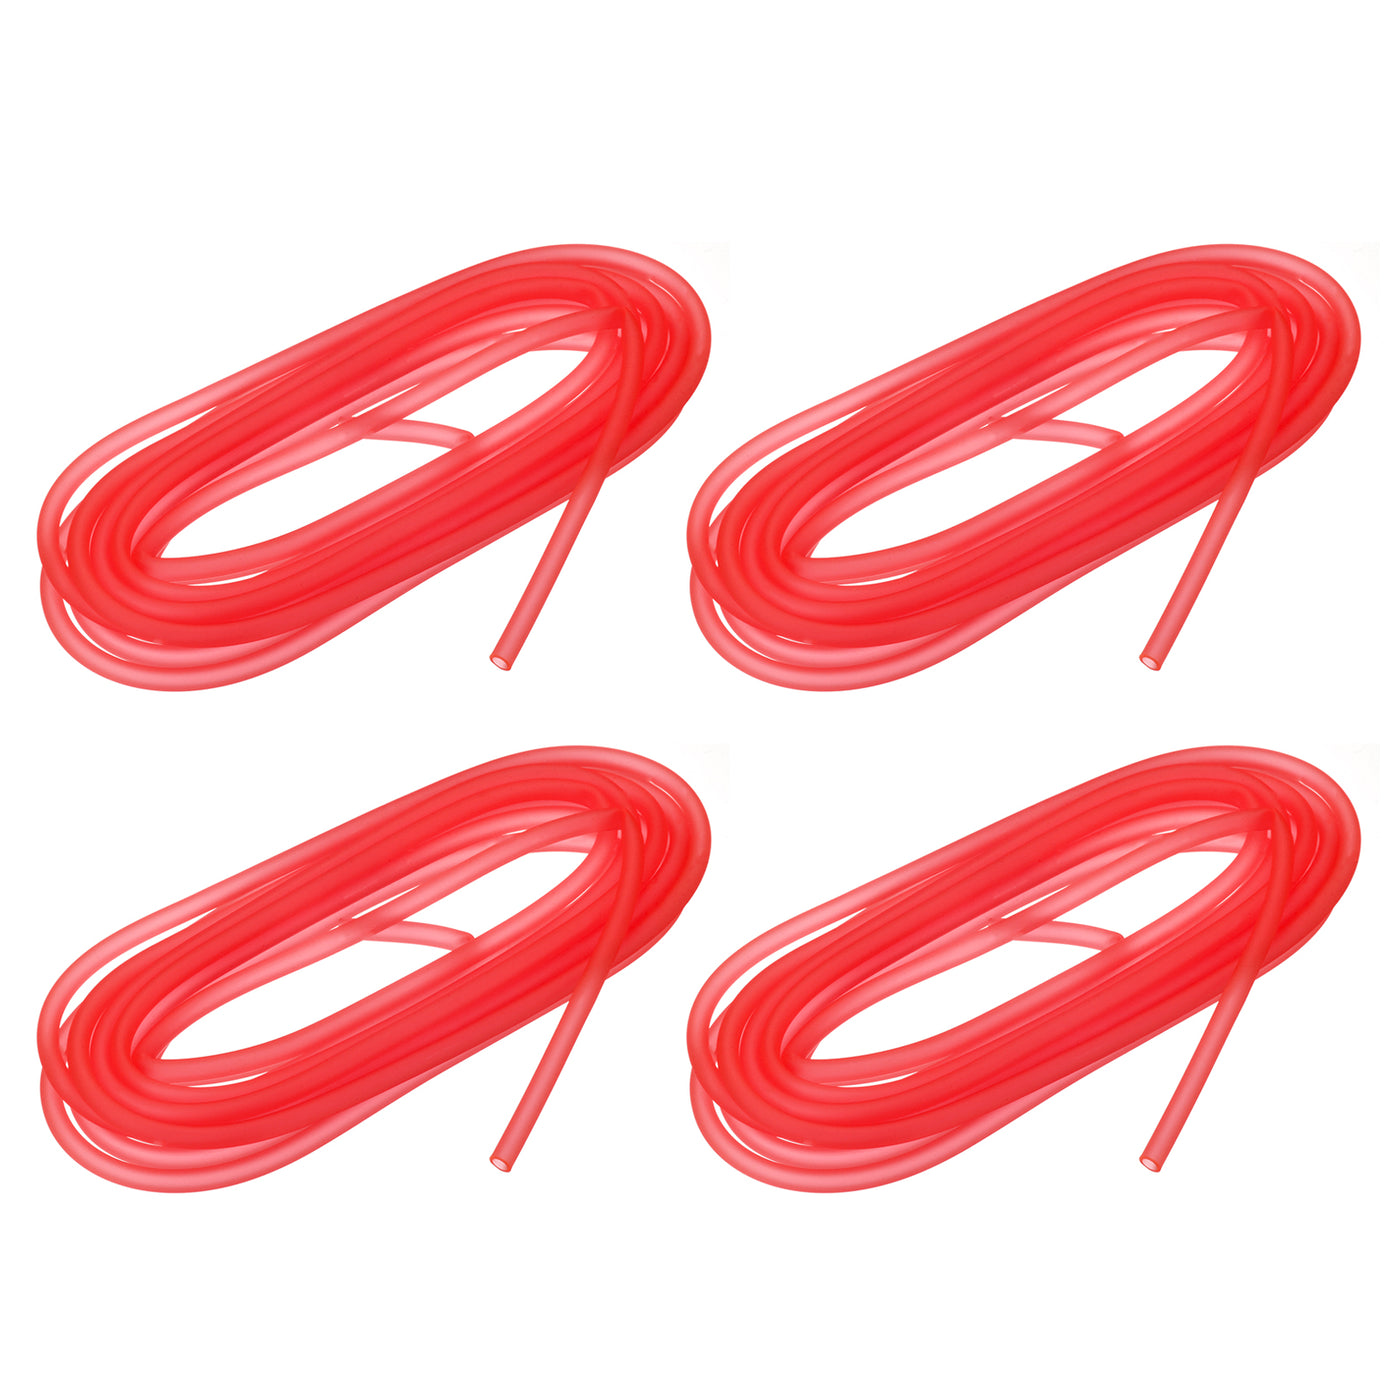 uxcell Uxcell Silicone Tubing 5/32" ID, 15/64" OD 4Pcs 13.12 Ft for Pump Transfer, Red